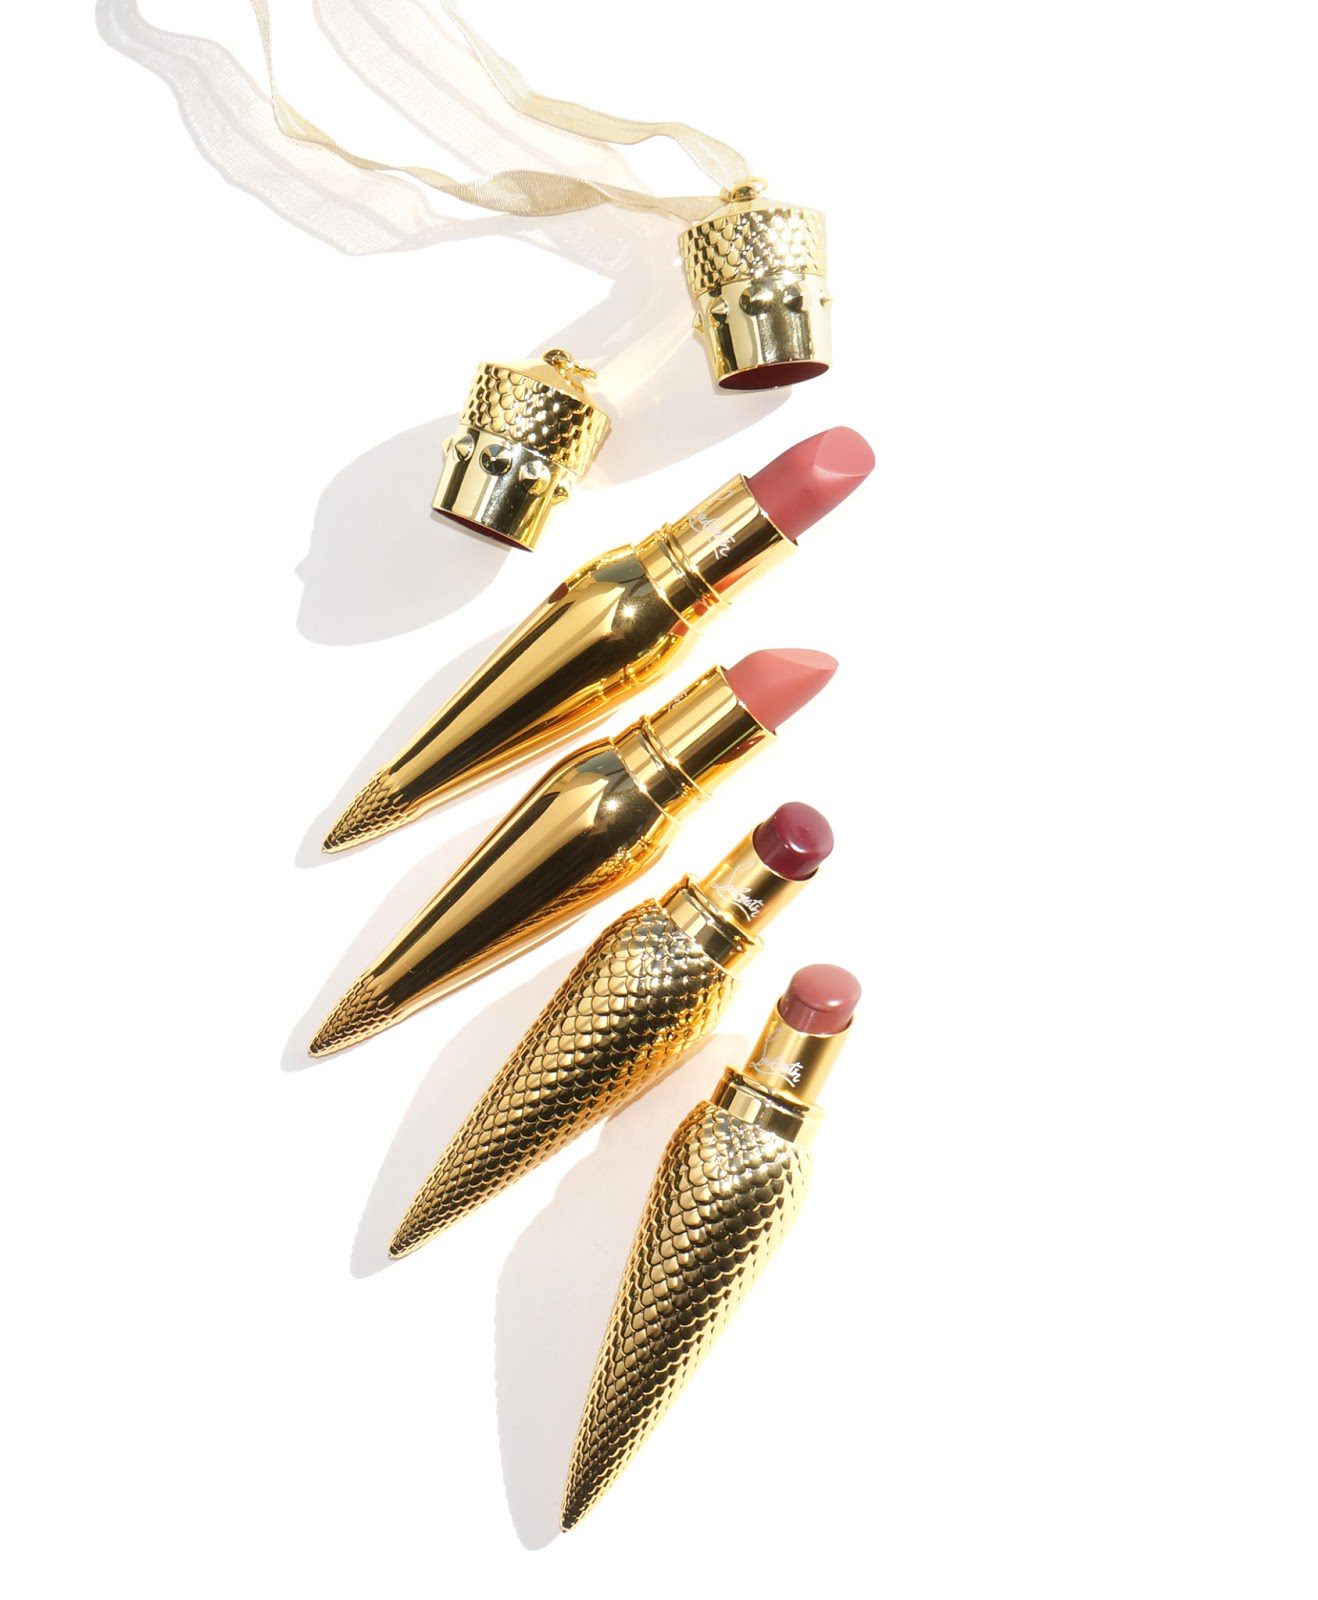 Louboutin Lipstick Belly Bloom, Tres Decollete, You You, Rose du Desert - The Beauty Look Book